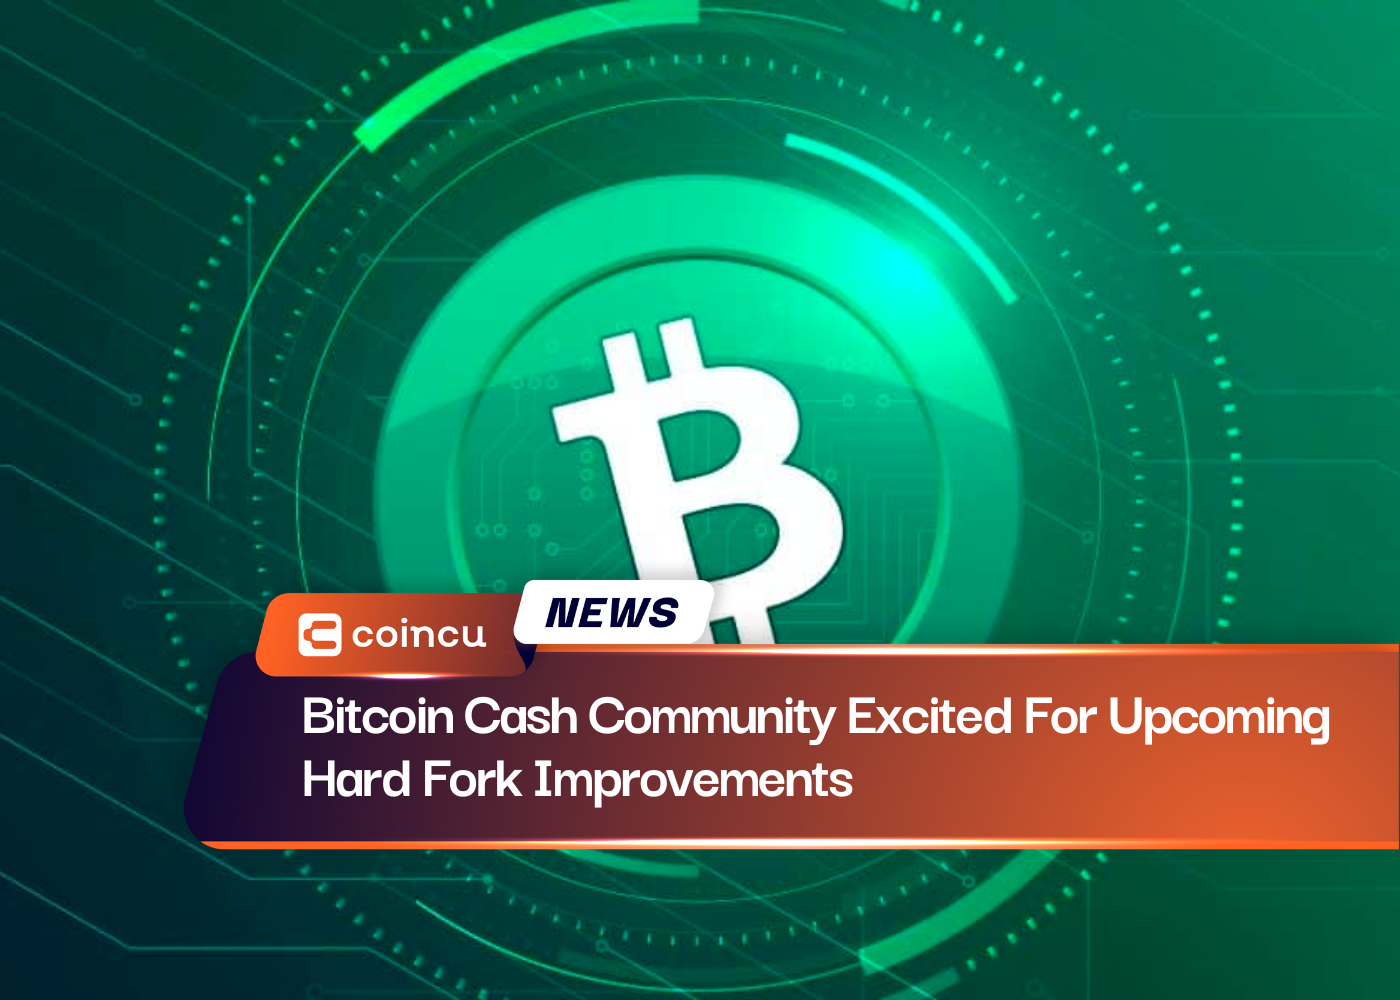 Bitcoin Cash Community Excited For Upcoming Hard Fork Improvements